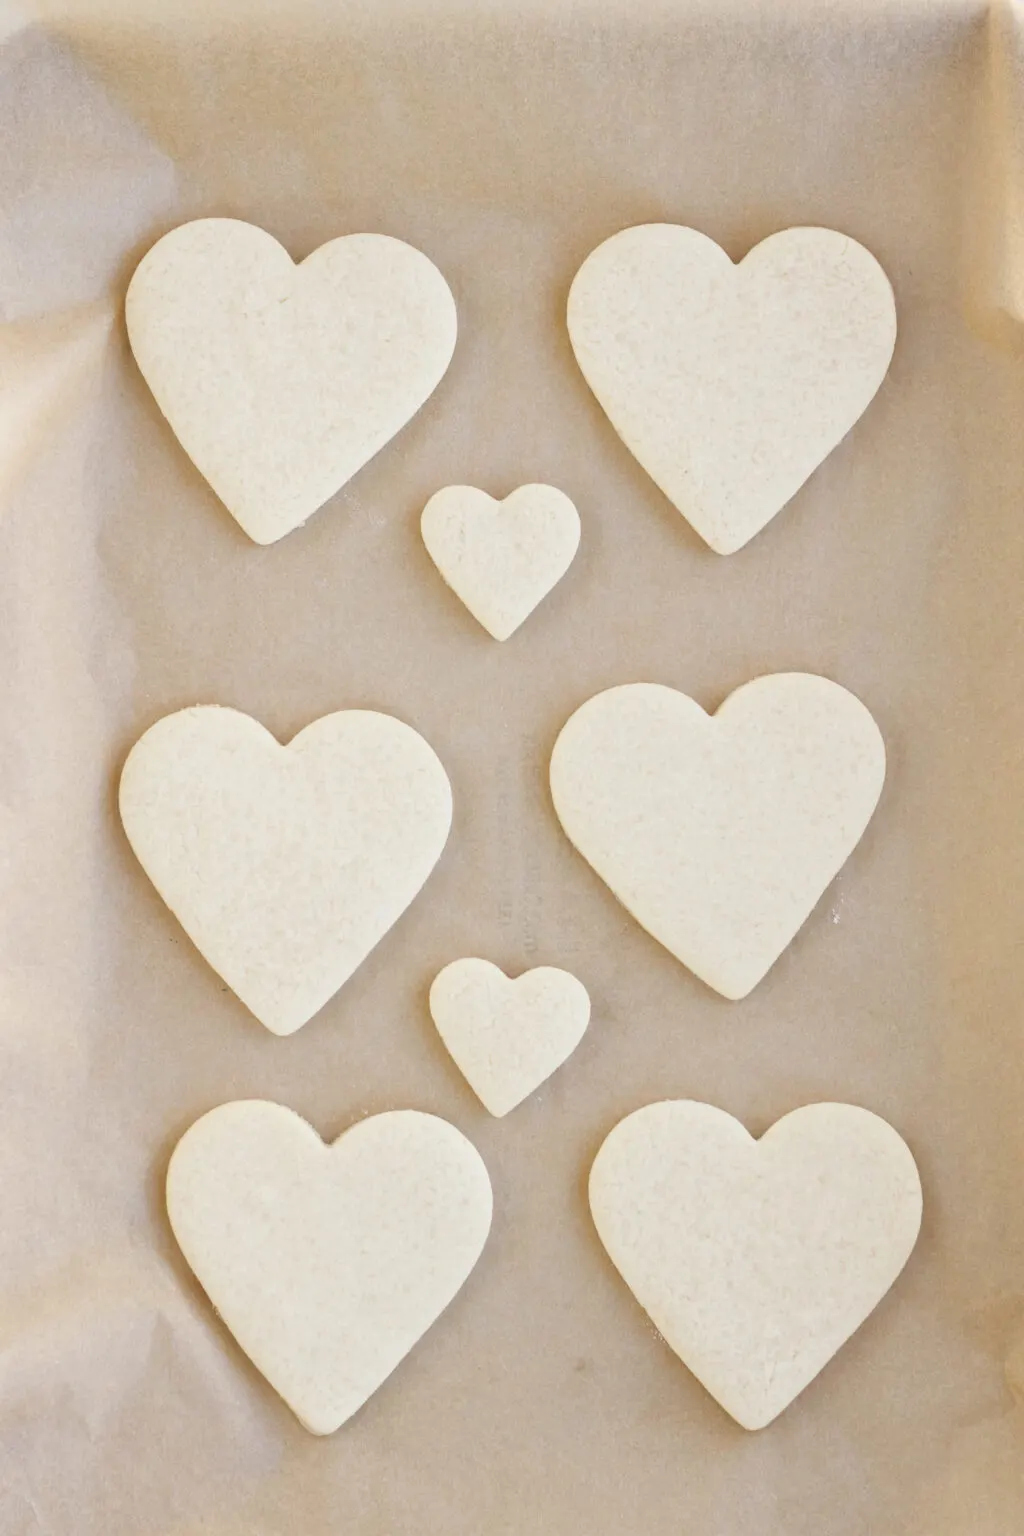 heart cookie dough on a cookie sheet